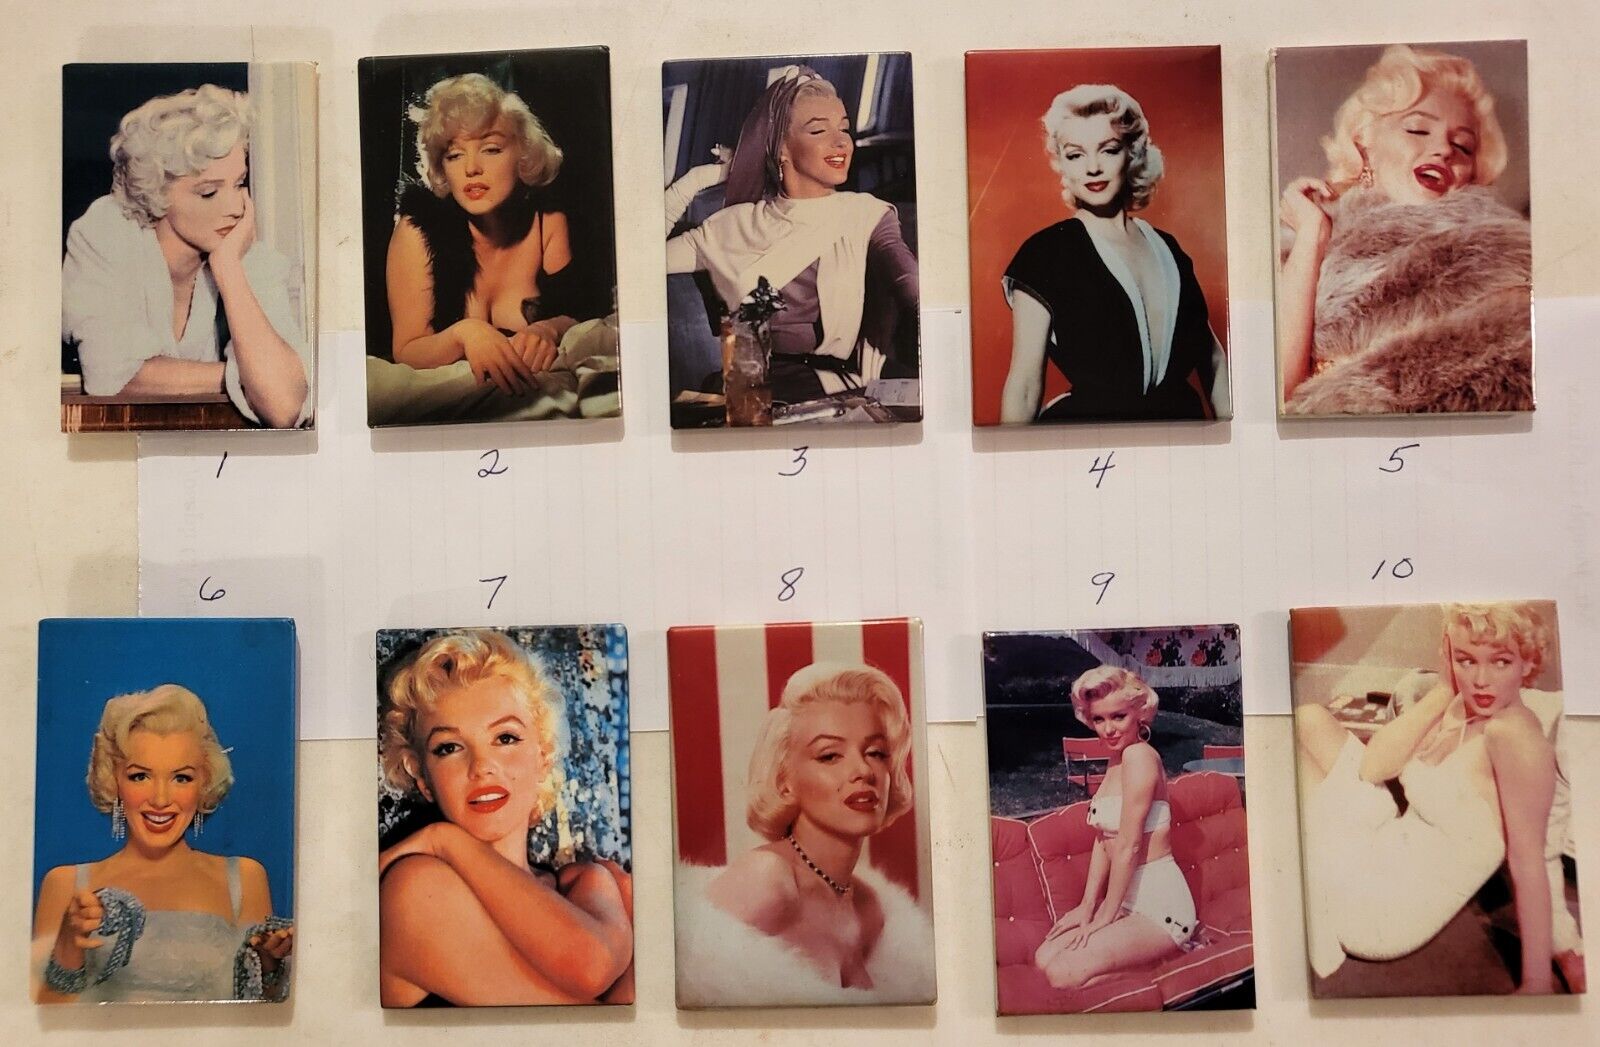 Marilyn Monroe - Magnets - Color Poses - You Pick $5 Each